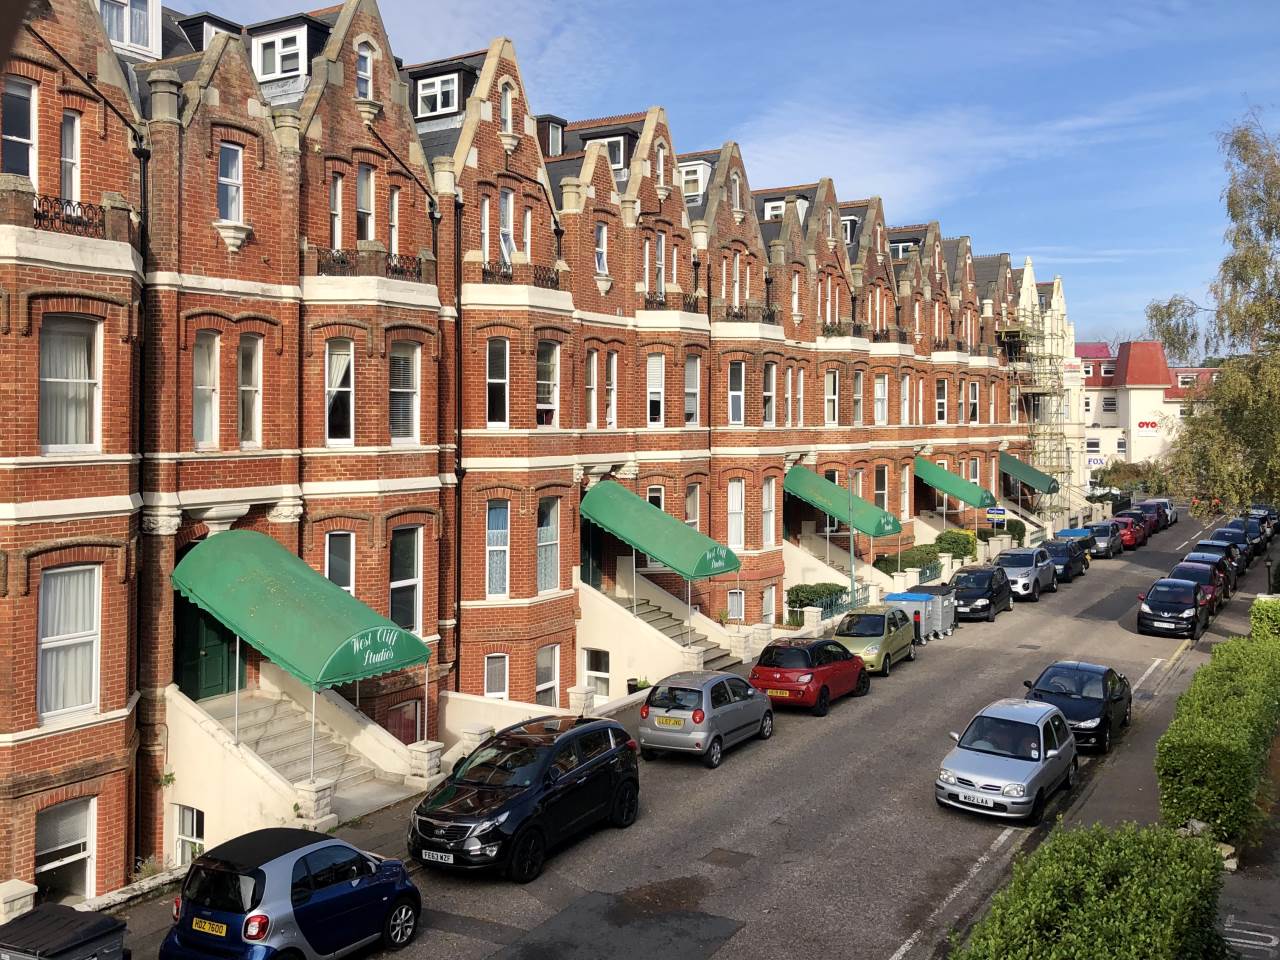 *ONE BEDROOM FIRST FLOOR FLAT* 400 YDS TO WEST CLIFF AND BEACHES* POPULAR BUY TO LET CHARACTER BUILDING* LIVING ROOM WITH BAY WINDOW* 92 YEAR LEASE REMAINING*